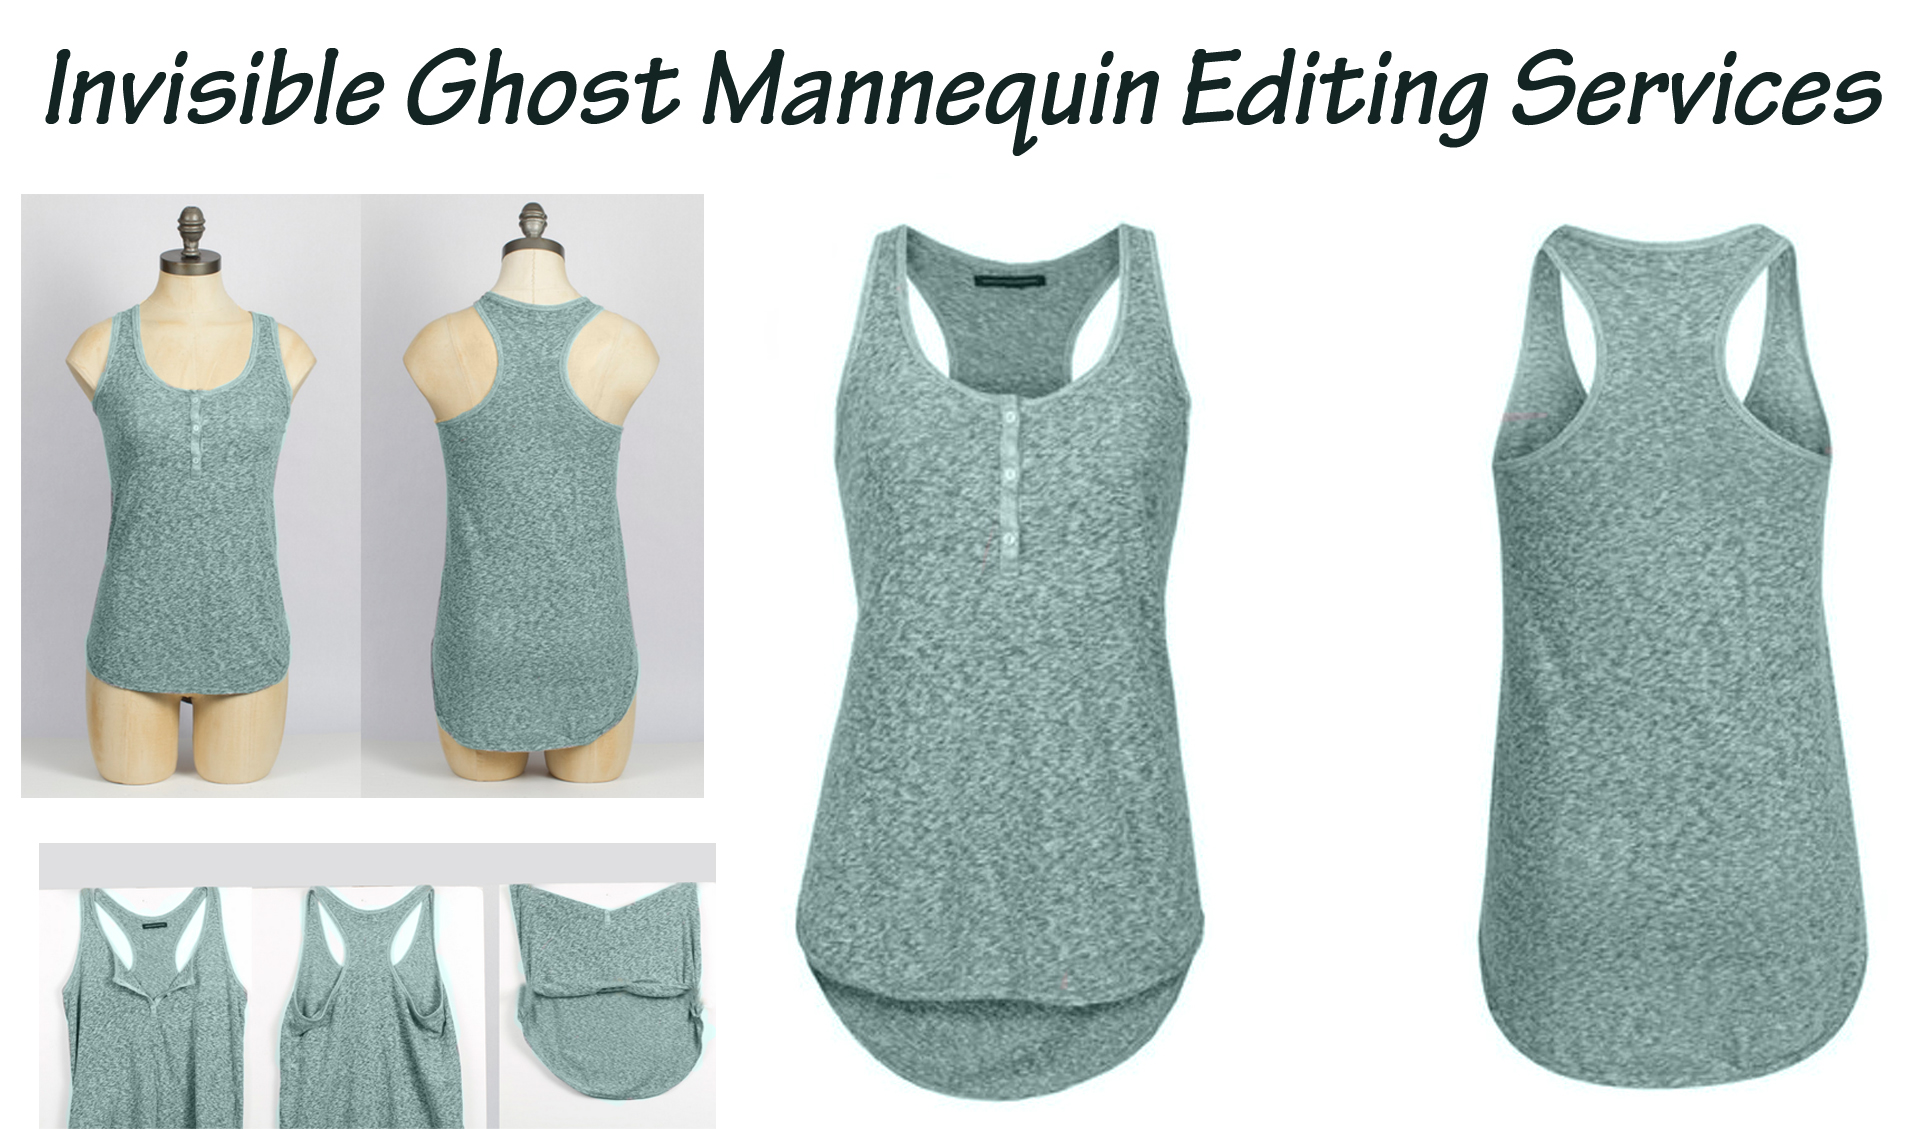 Invisible Ghost Mannequin Photo Editing Services | Ghost Mannequin Effect in Photoshop